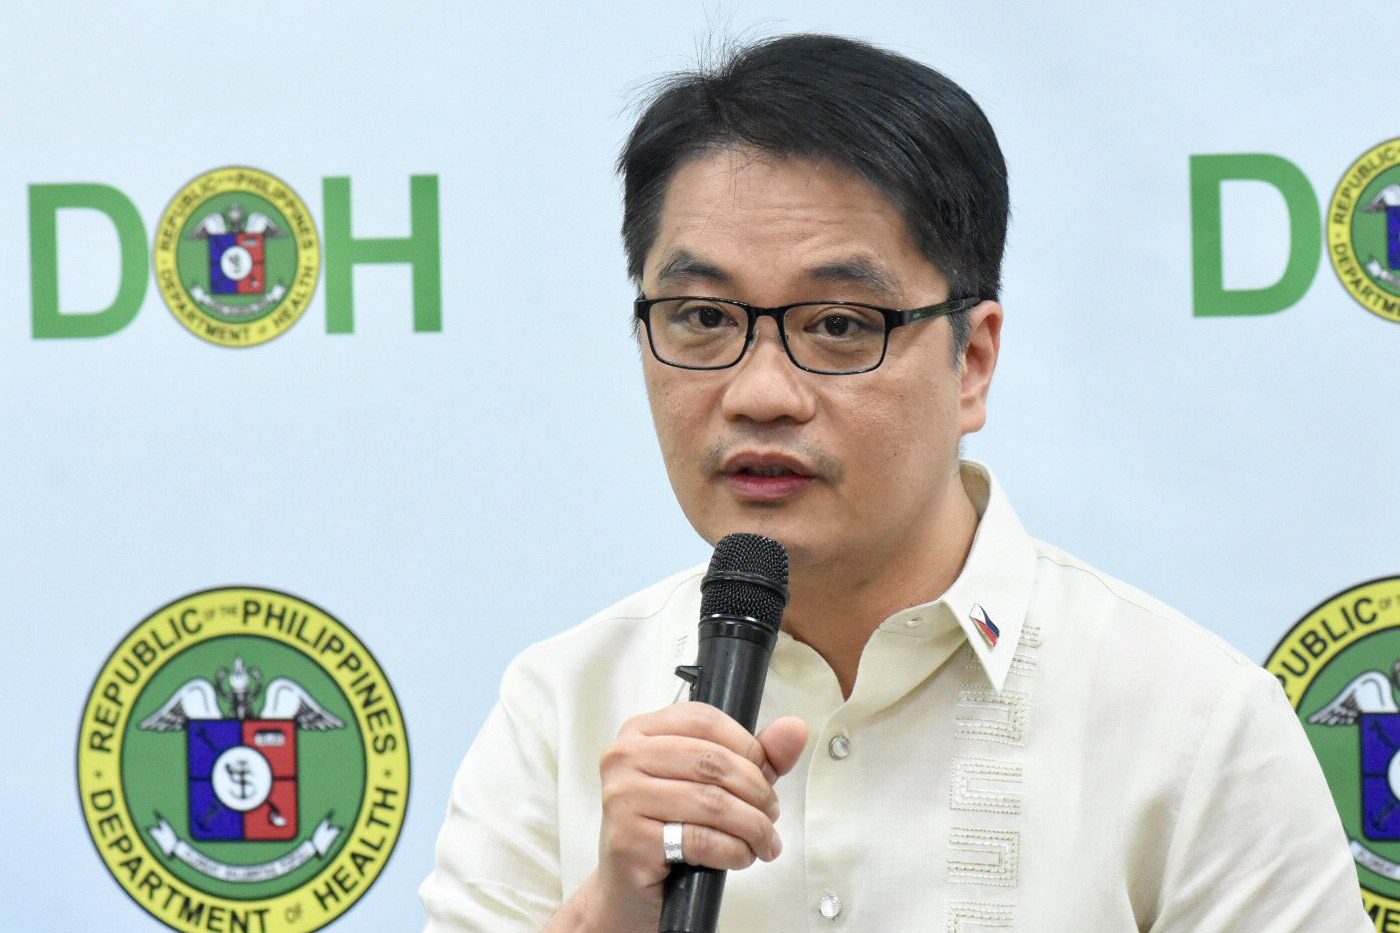 DOH: Over 3,000 students hospitalized after Dengvaxia shot